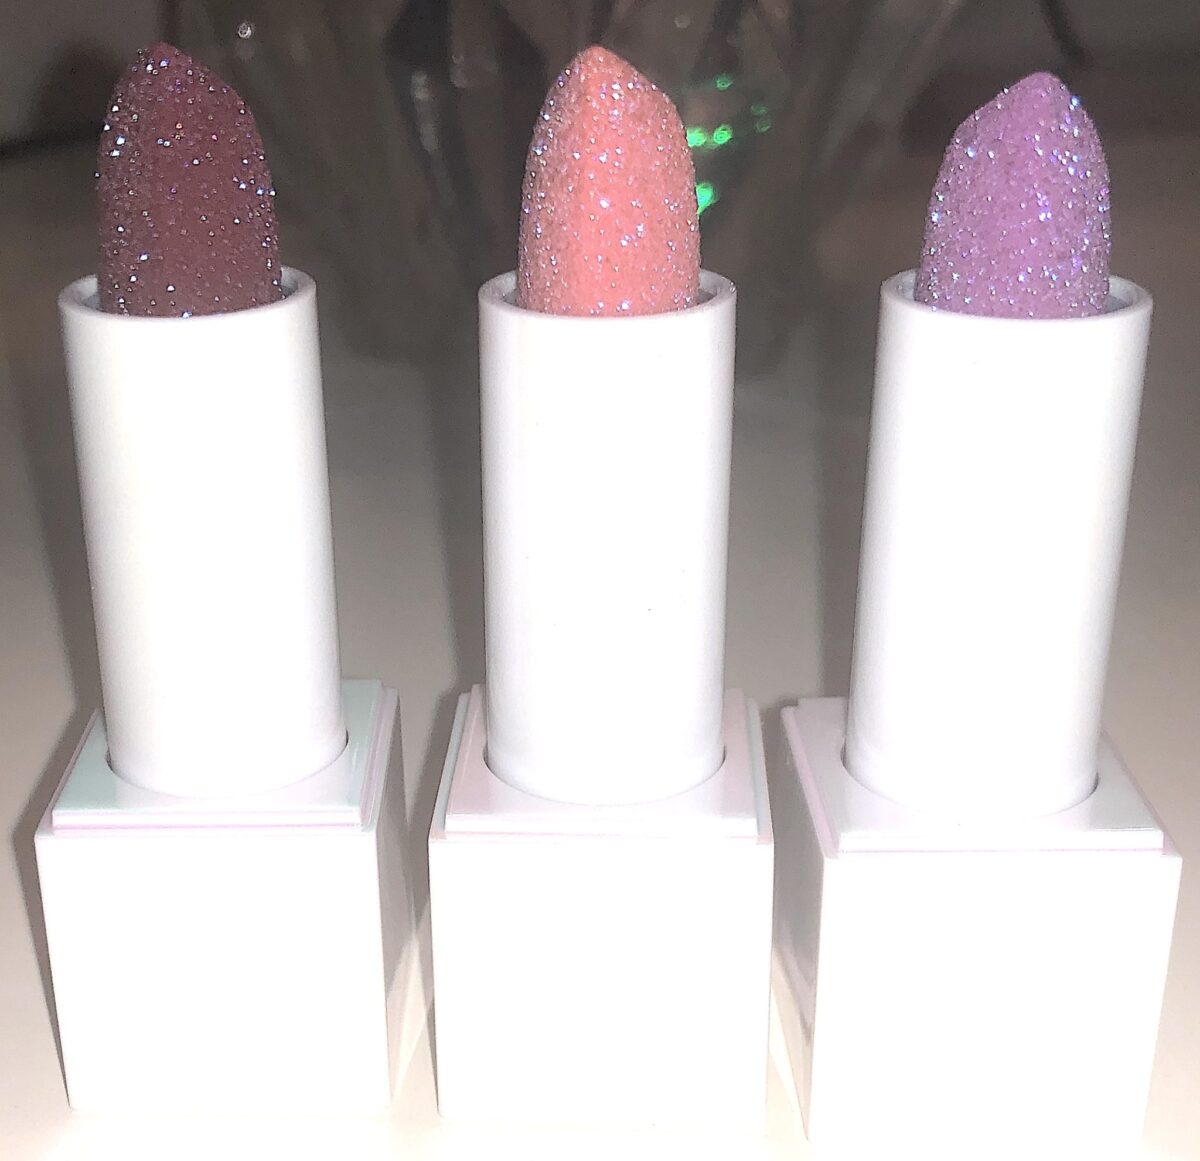 THE OUTSIDE OF THE HUDA DIAMOND HYDRATING LIP BALM IS COVERED WITH DIAMOND-LIKE SPARKLES